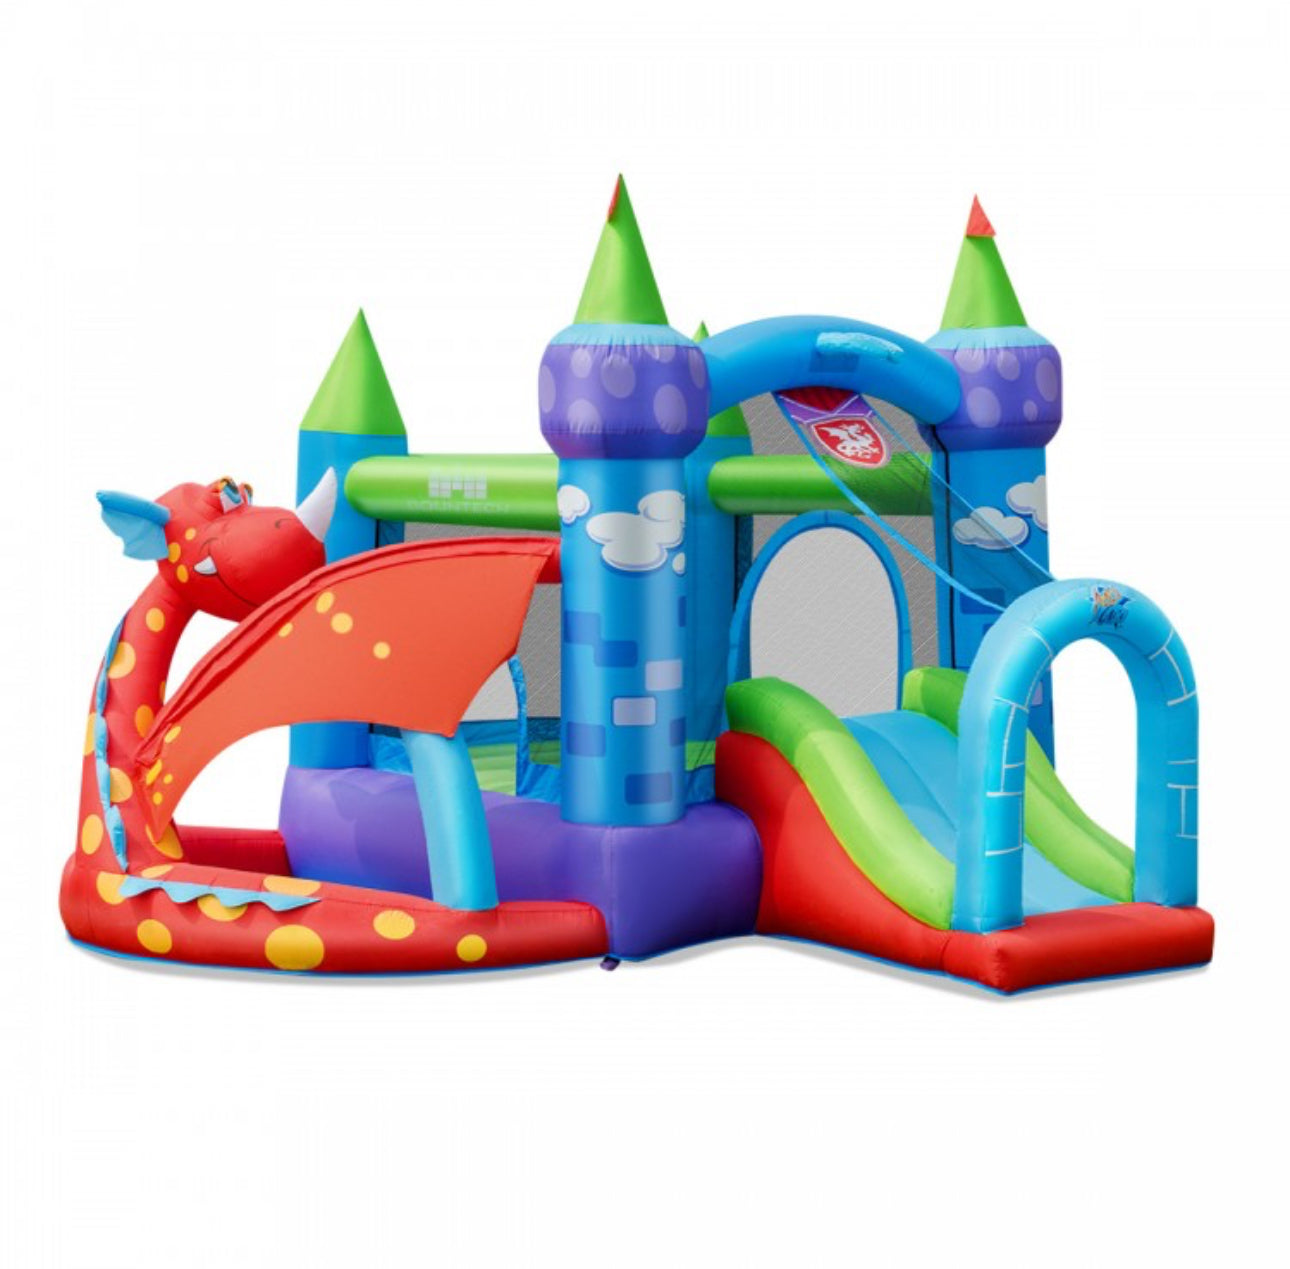 Super Cool & Fun Kids Awesome Dragon Inflatable Bouncy House Castle W 740W Blower | Slide | Ball Pit | Balls | Jump Area | Basketball | Indoor / Outdoor